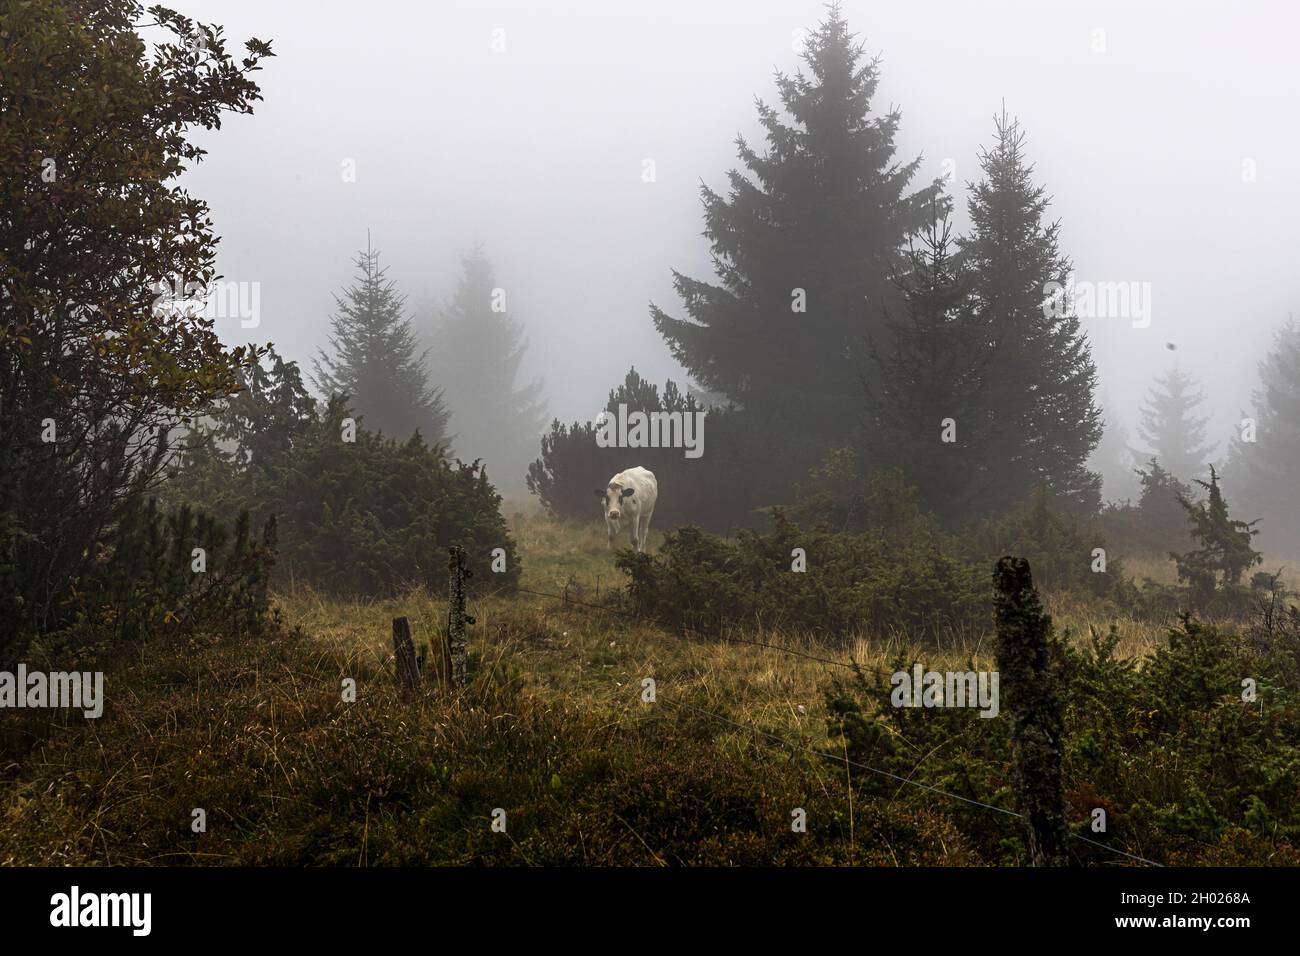 Dairy cattle in the misty forest of the Vosges Mountains, France Stock Photo